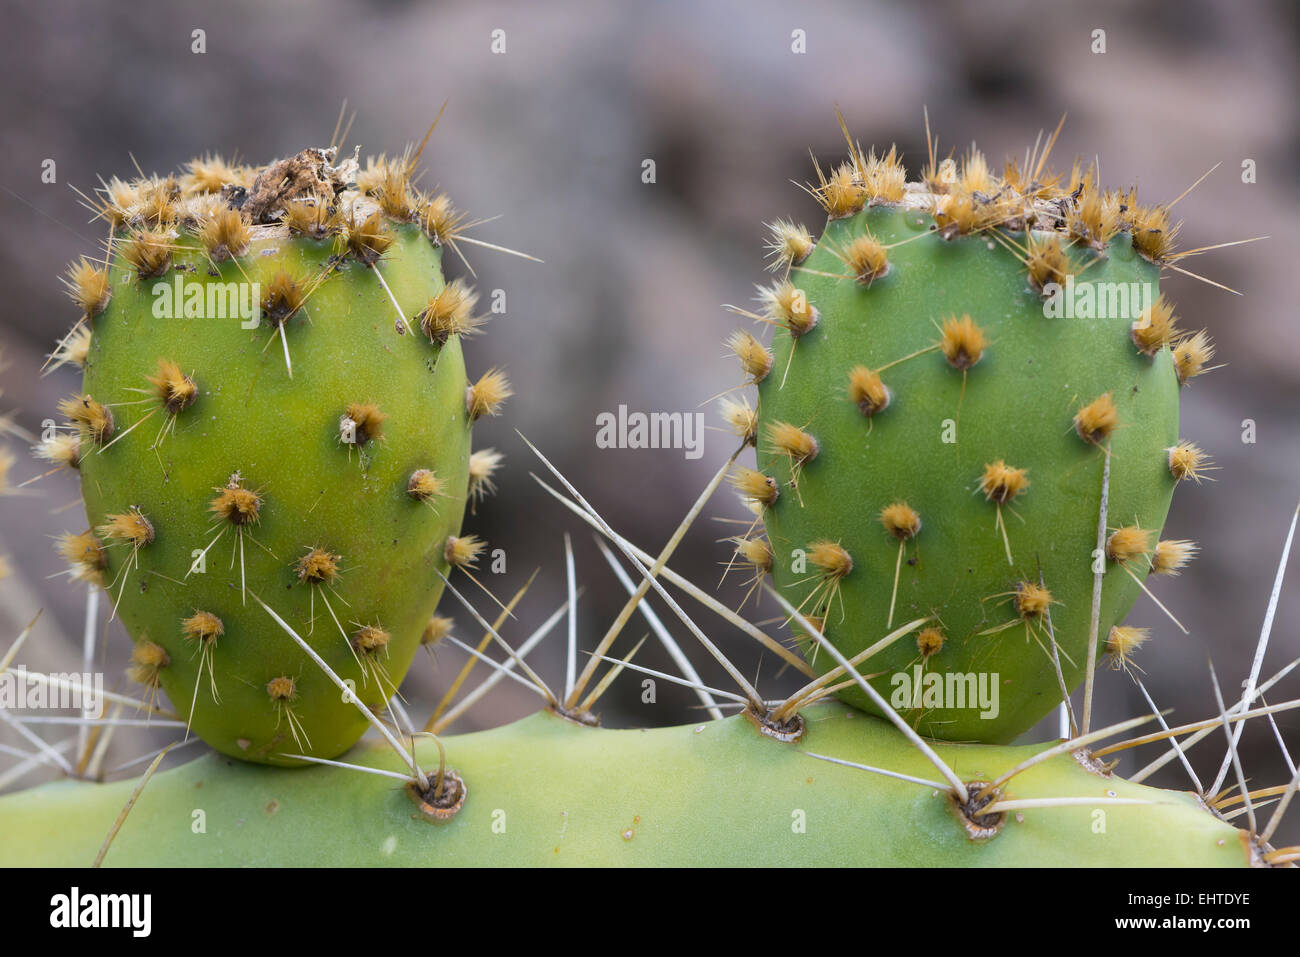 Detail of Cactus Leave with Thorns. Stock Photo